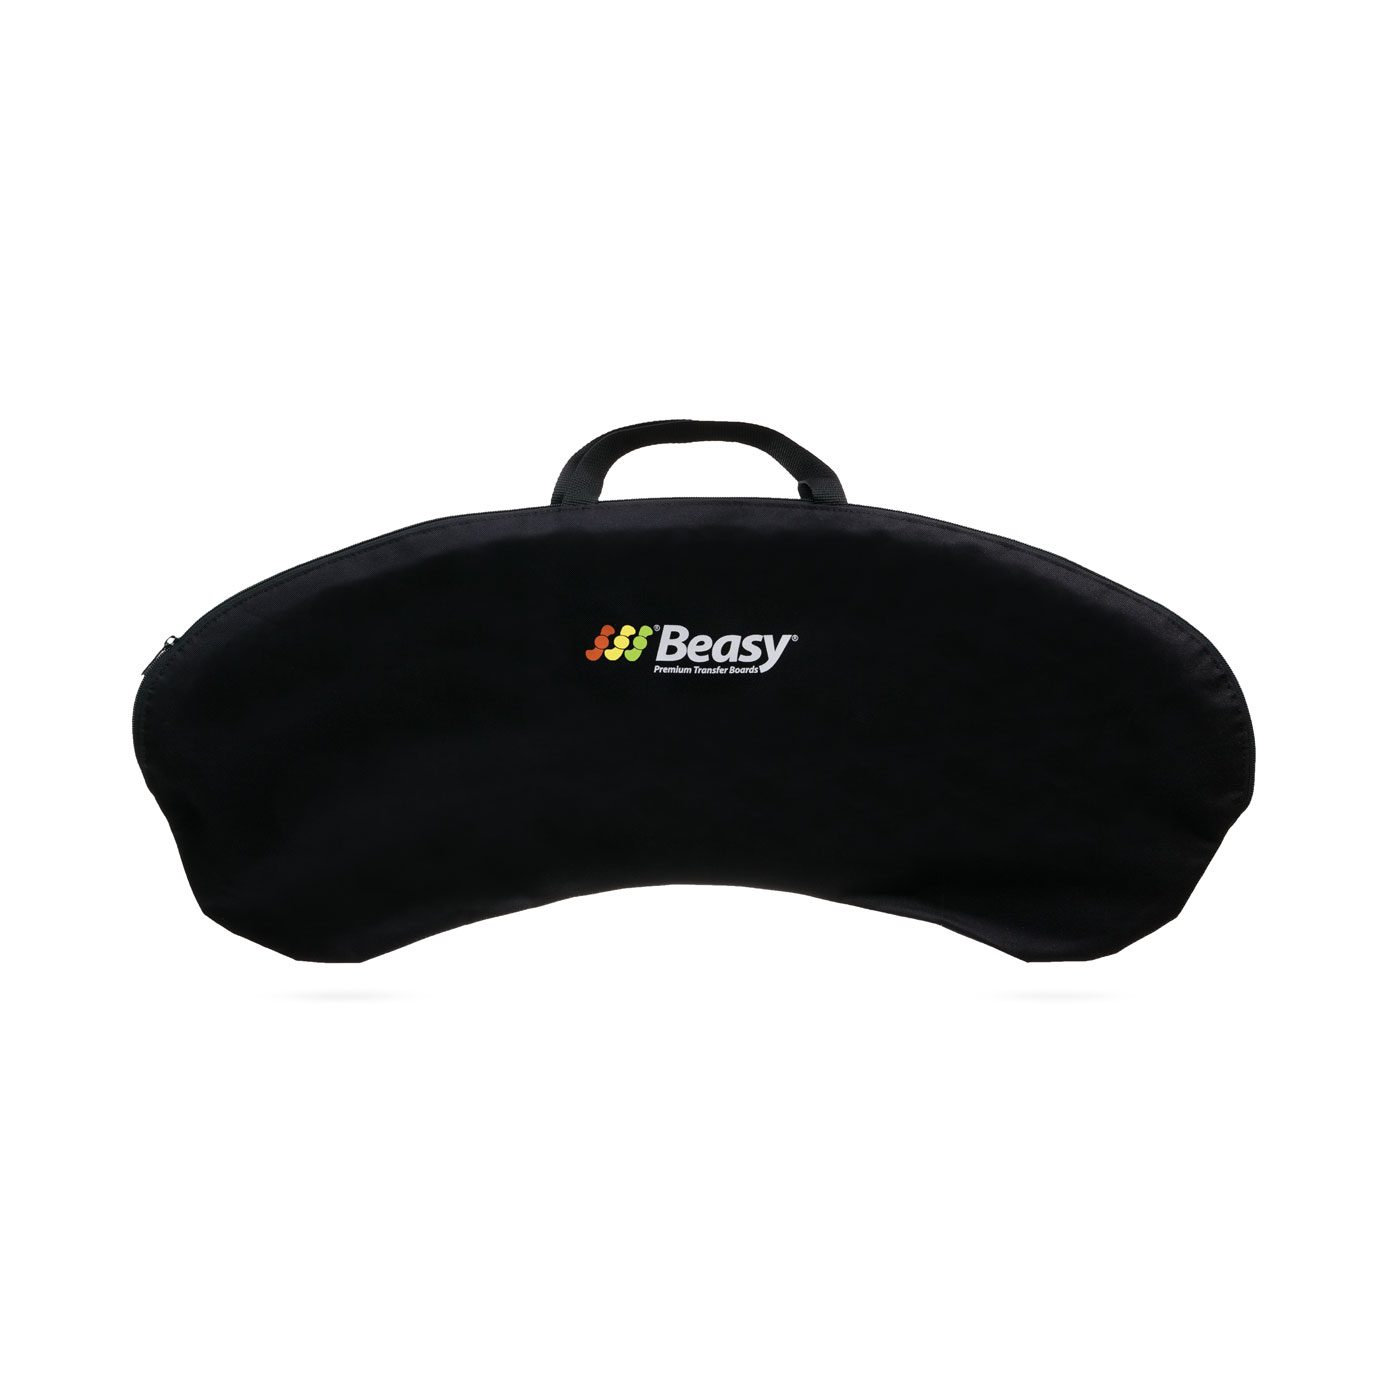 New Beasy carry case with straps